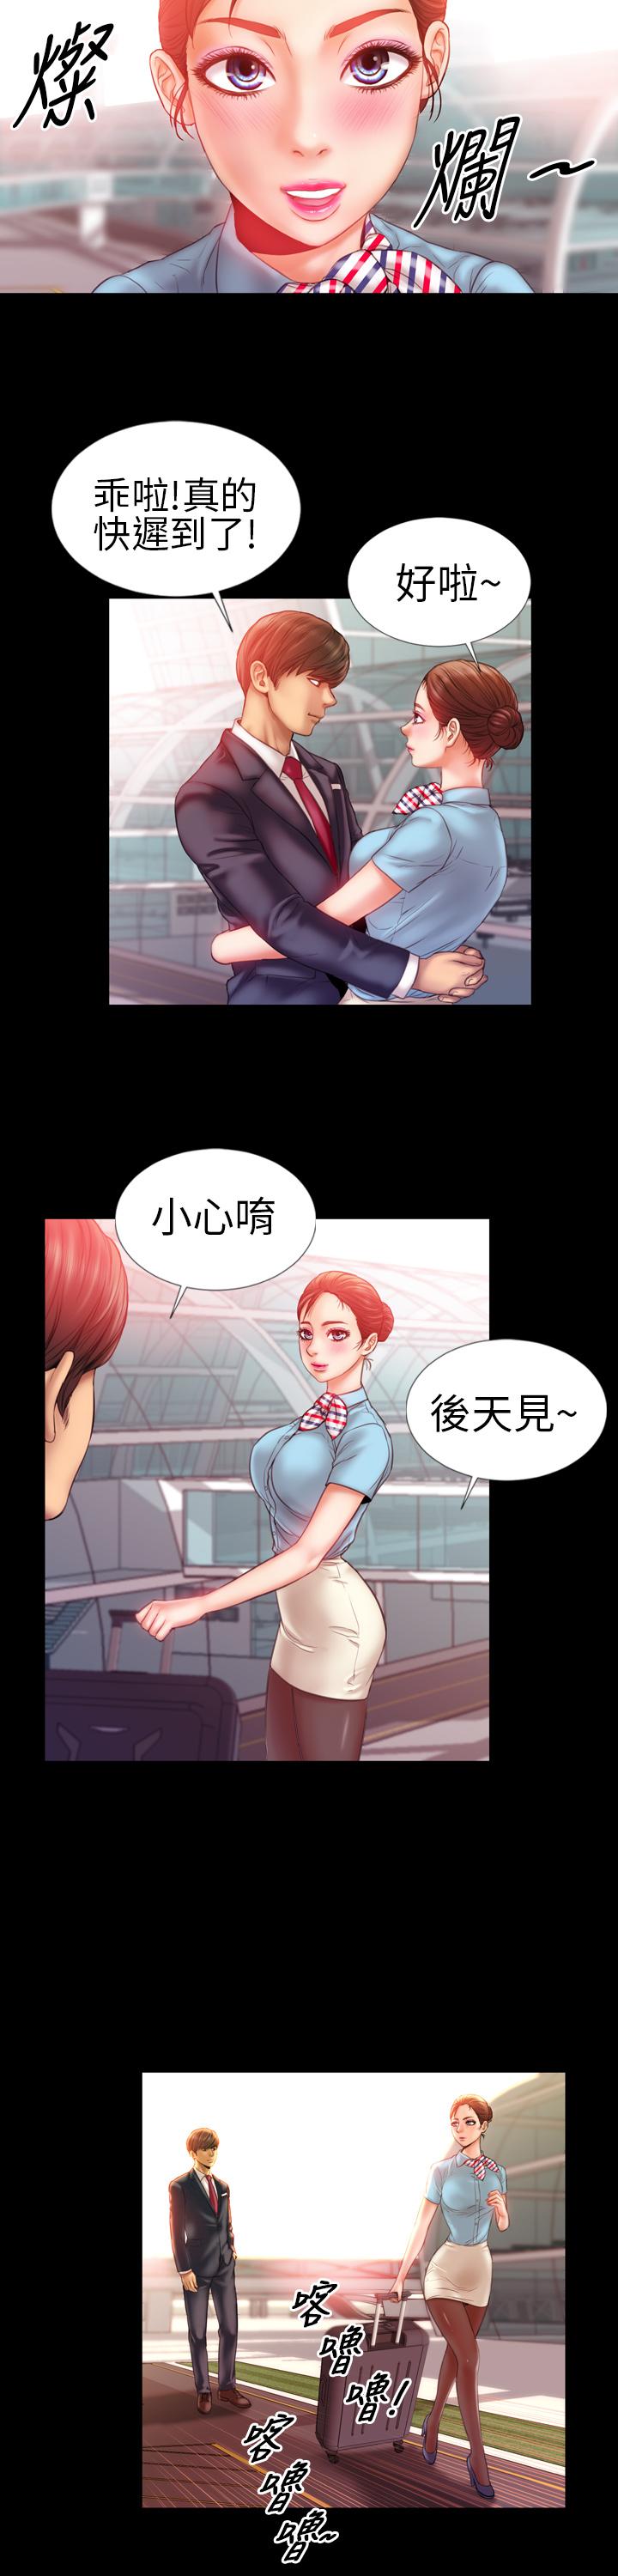 MY WIVES (淫蕩的妻子們) Ch.1 (Chinese) 17